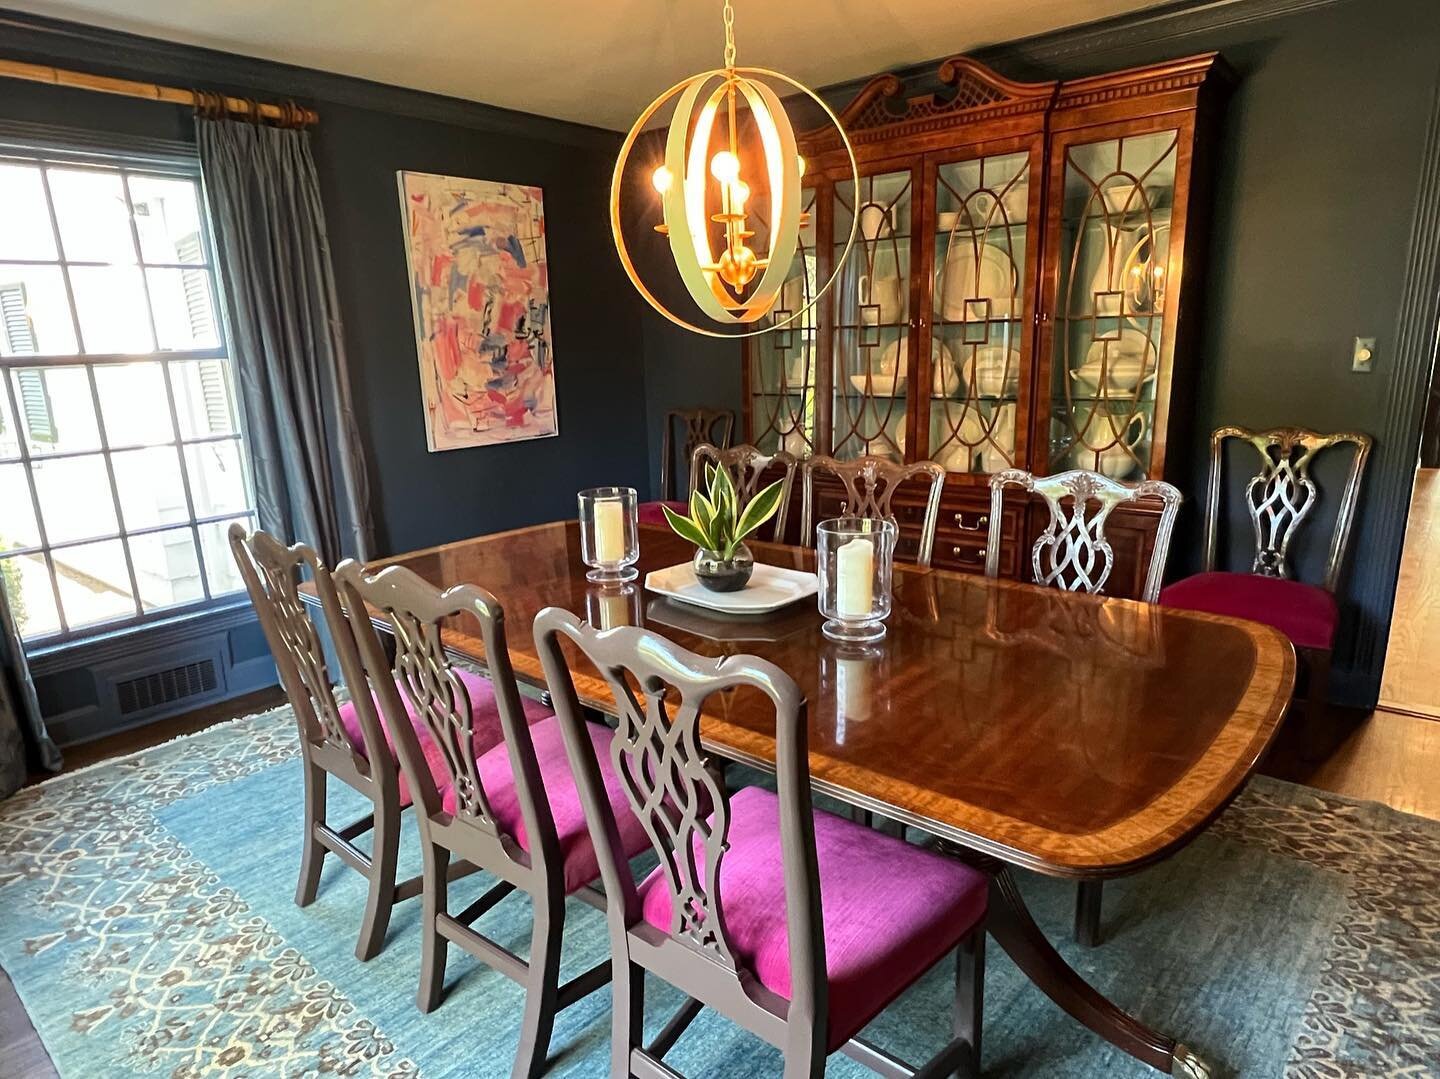 We love this client&rsquo;s use of color! Henredon Dining Room Set. 
Double Pedestal Table, 3 leaves and pads &amp; 8 Chairs. Table is 45w x 68l x 29h without leaf, each leaf add 22. 
Painted Chairs with Magenta Upholstered Seats. Table $1375
Chairs 